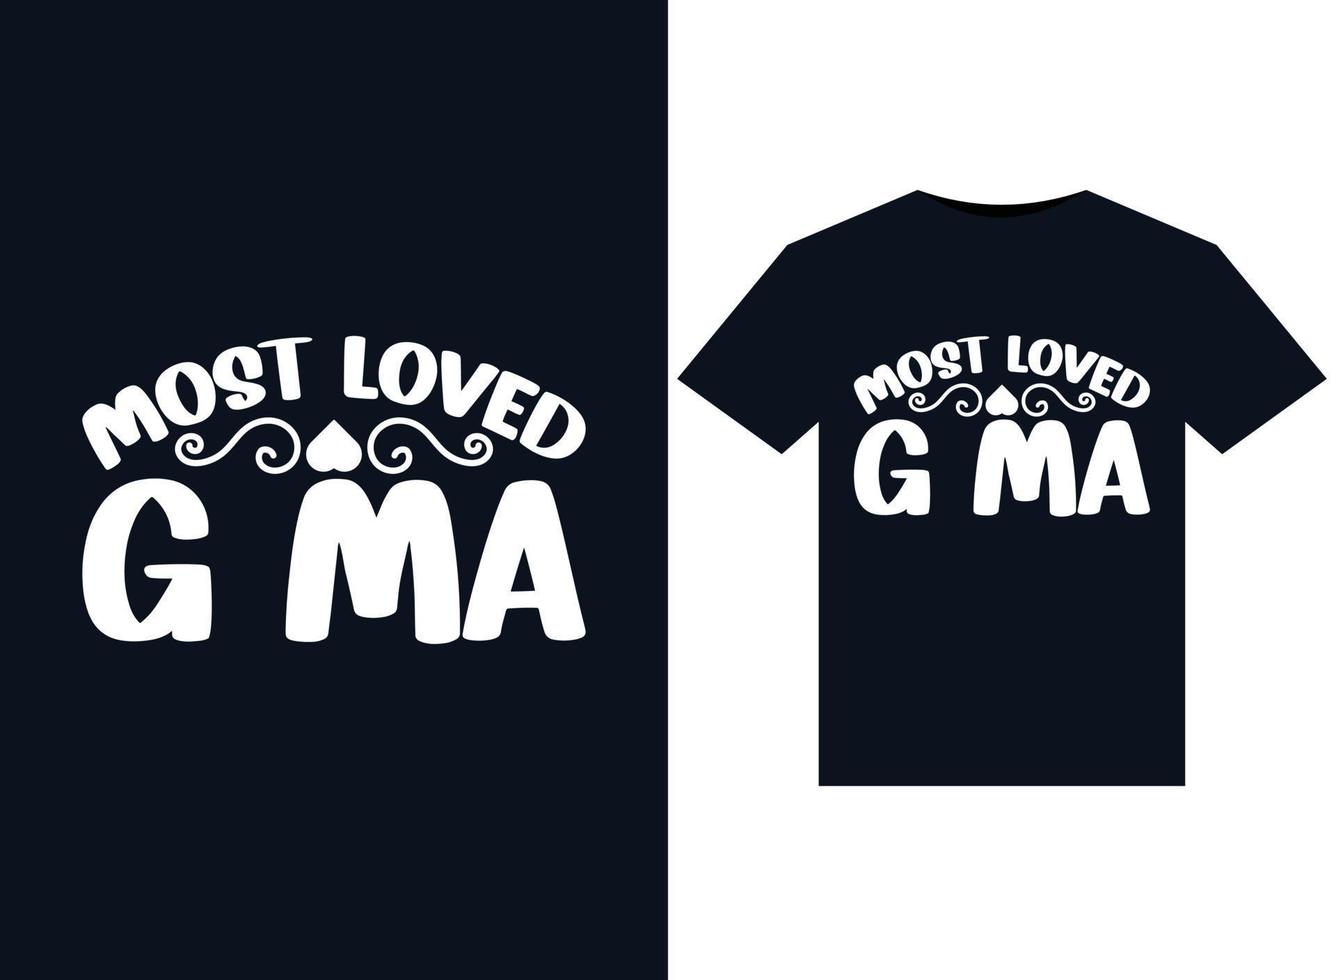 Most Loved G Ma illustrations for print-ready T-Shirts design vector